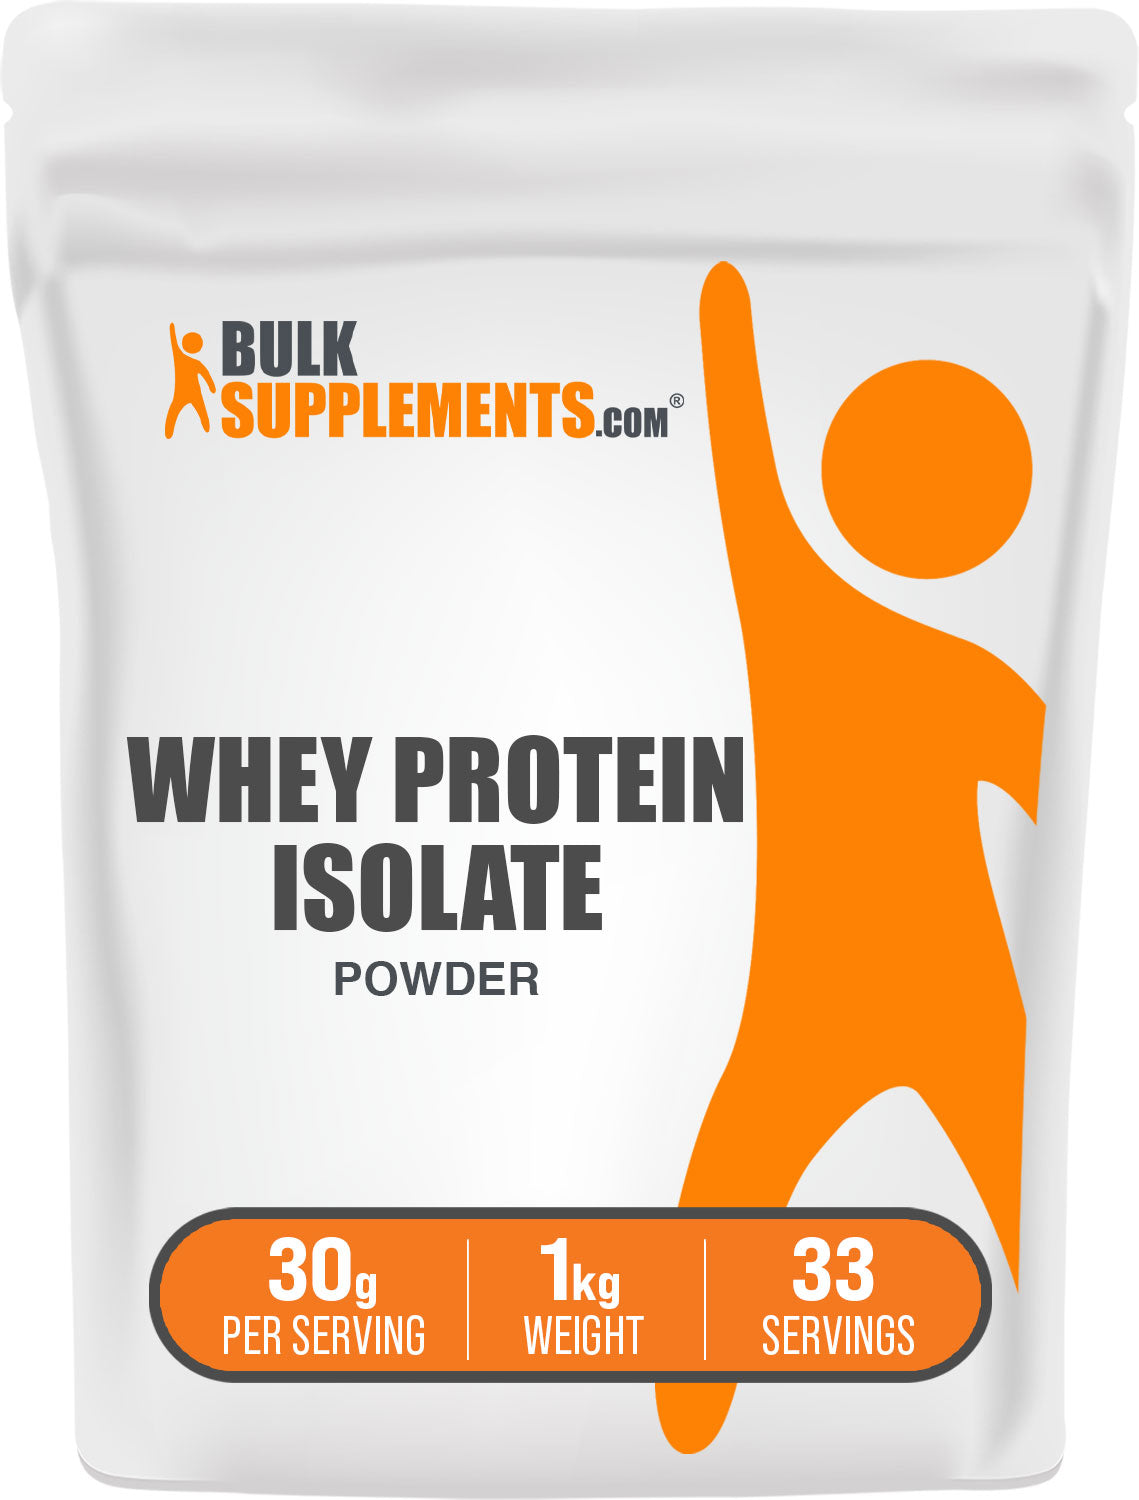 Why Buy Milk Protein Isolate Instead of Whey Protein or Caseinates?